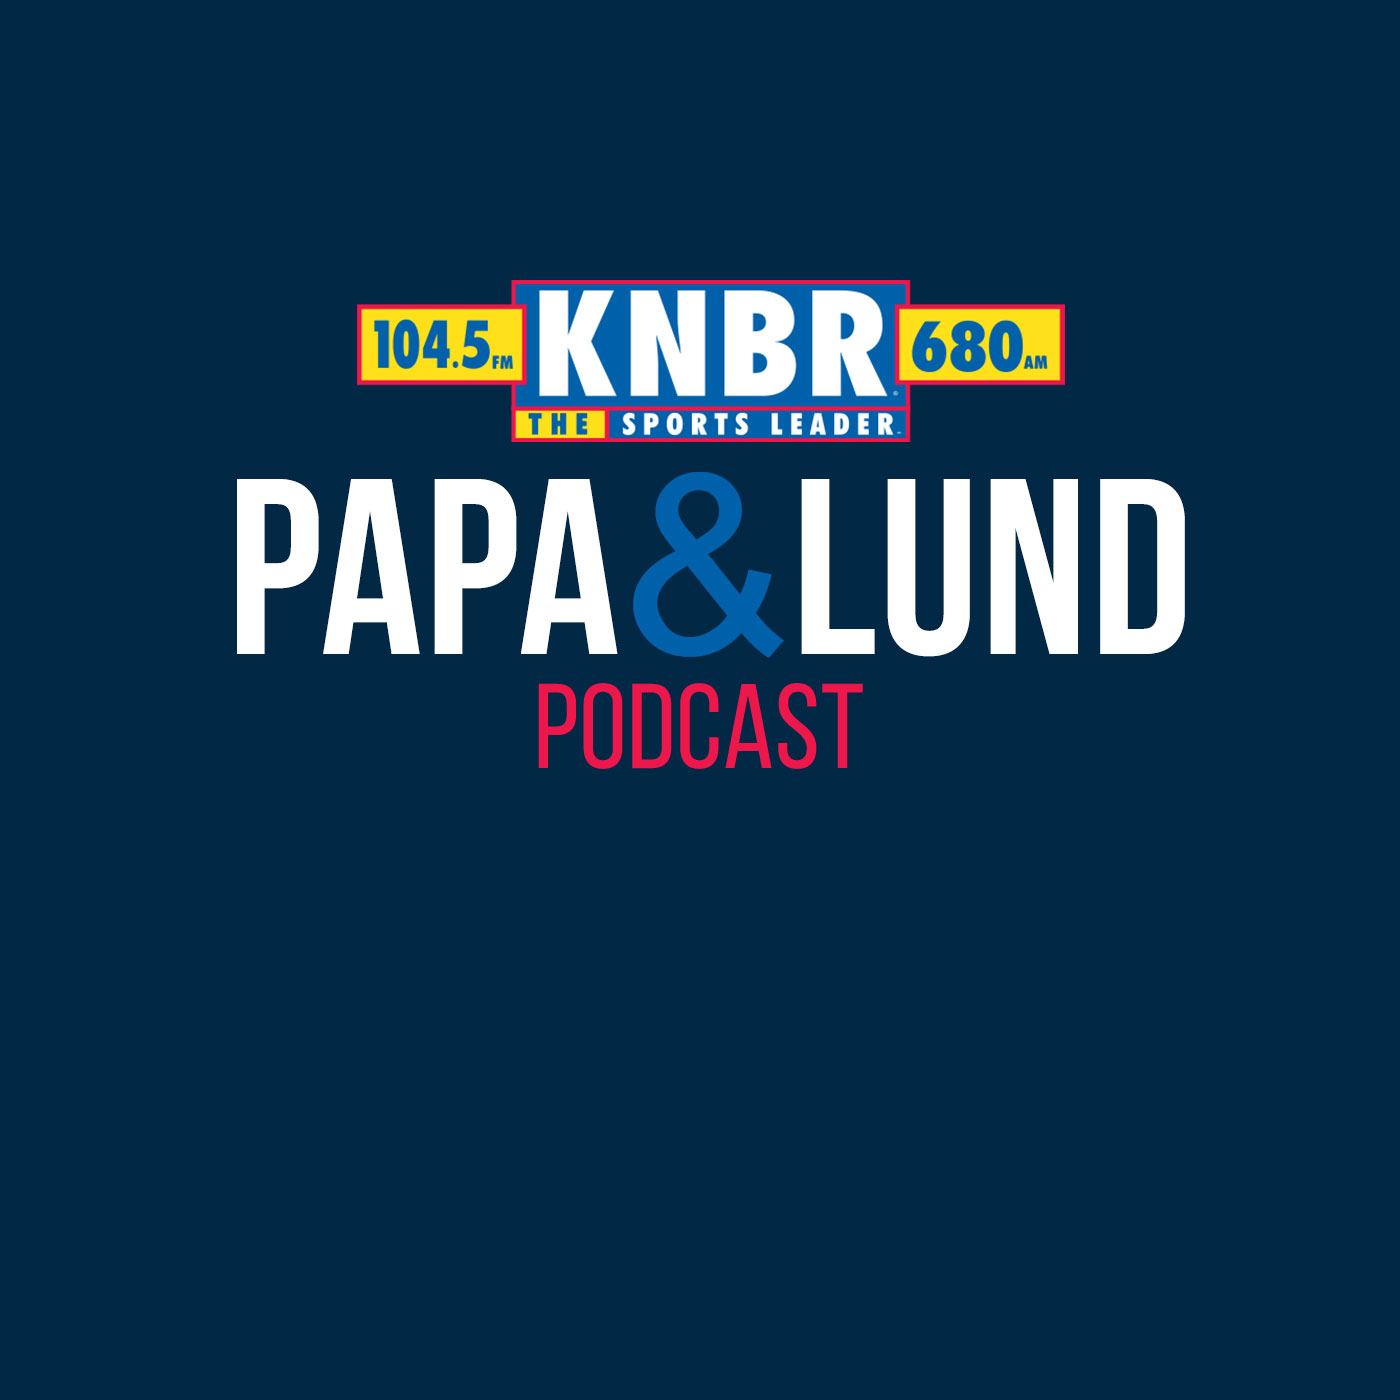 10-12 Tim Ryan joins Papa and Lund for this week's rendition of the "Power Hour" to analyze the 49ers' performance against the Cowboys, the addition of Randy Gregory, and preview the upcoming matchup against the Browns